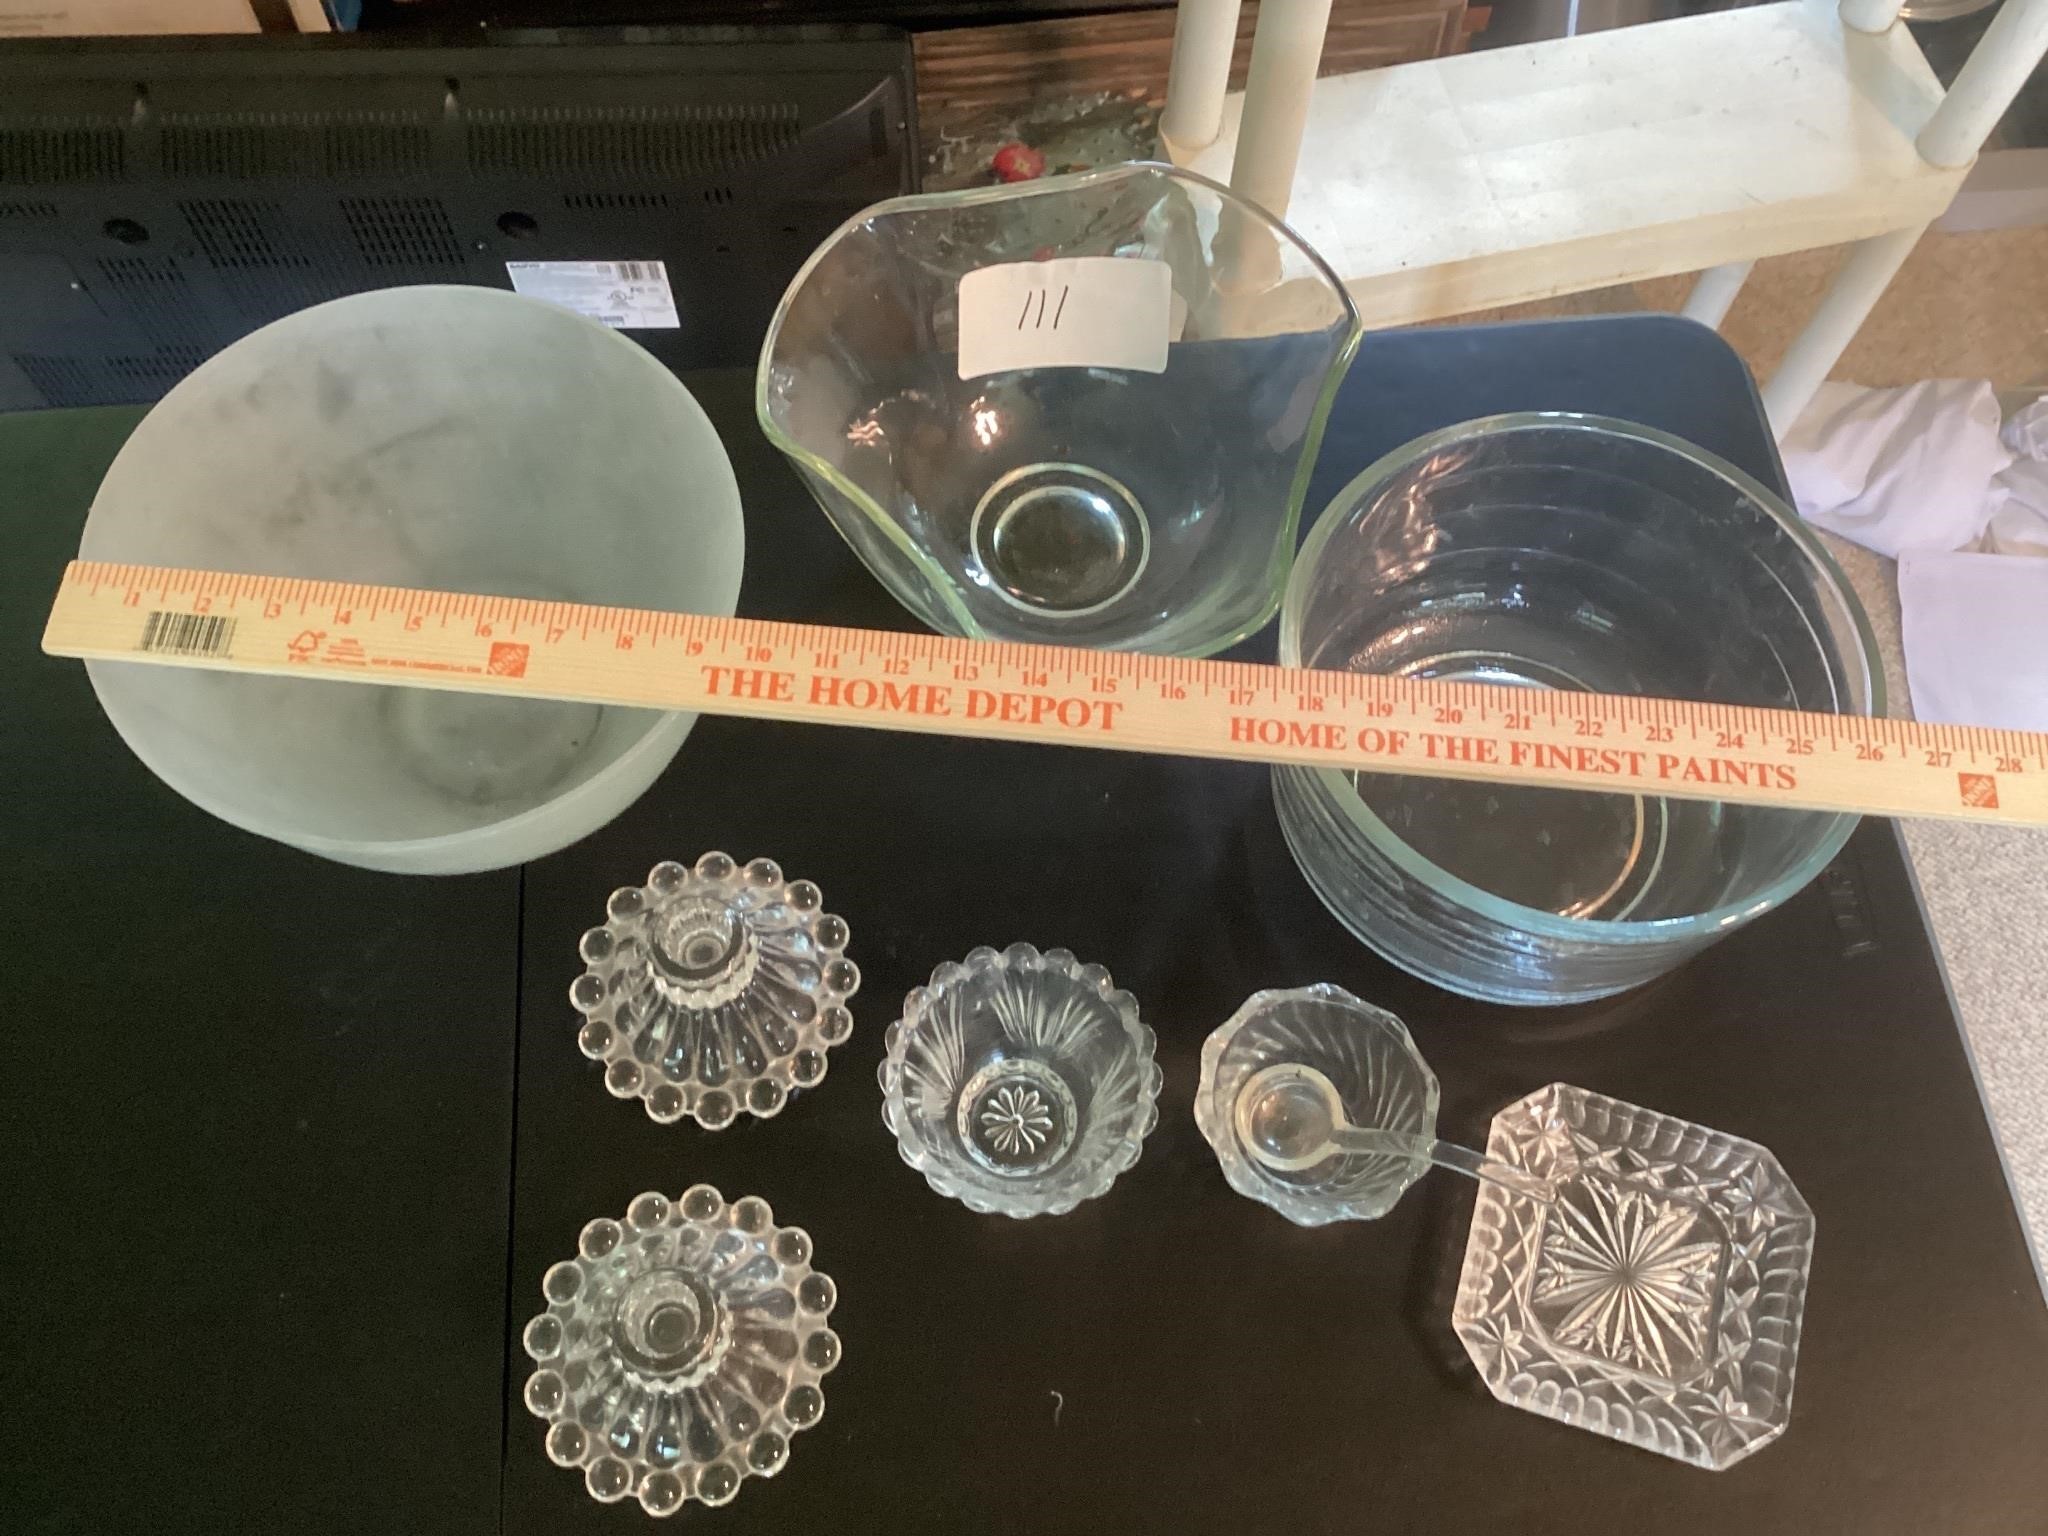 3 GLASS BOWLS. 2 CANDLE HOLDERS. 3 GLASS PIECES